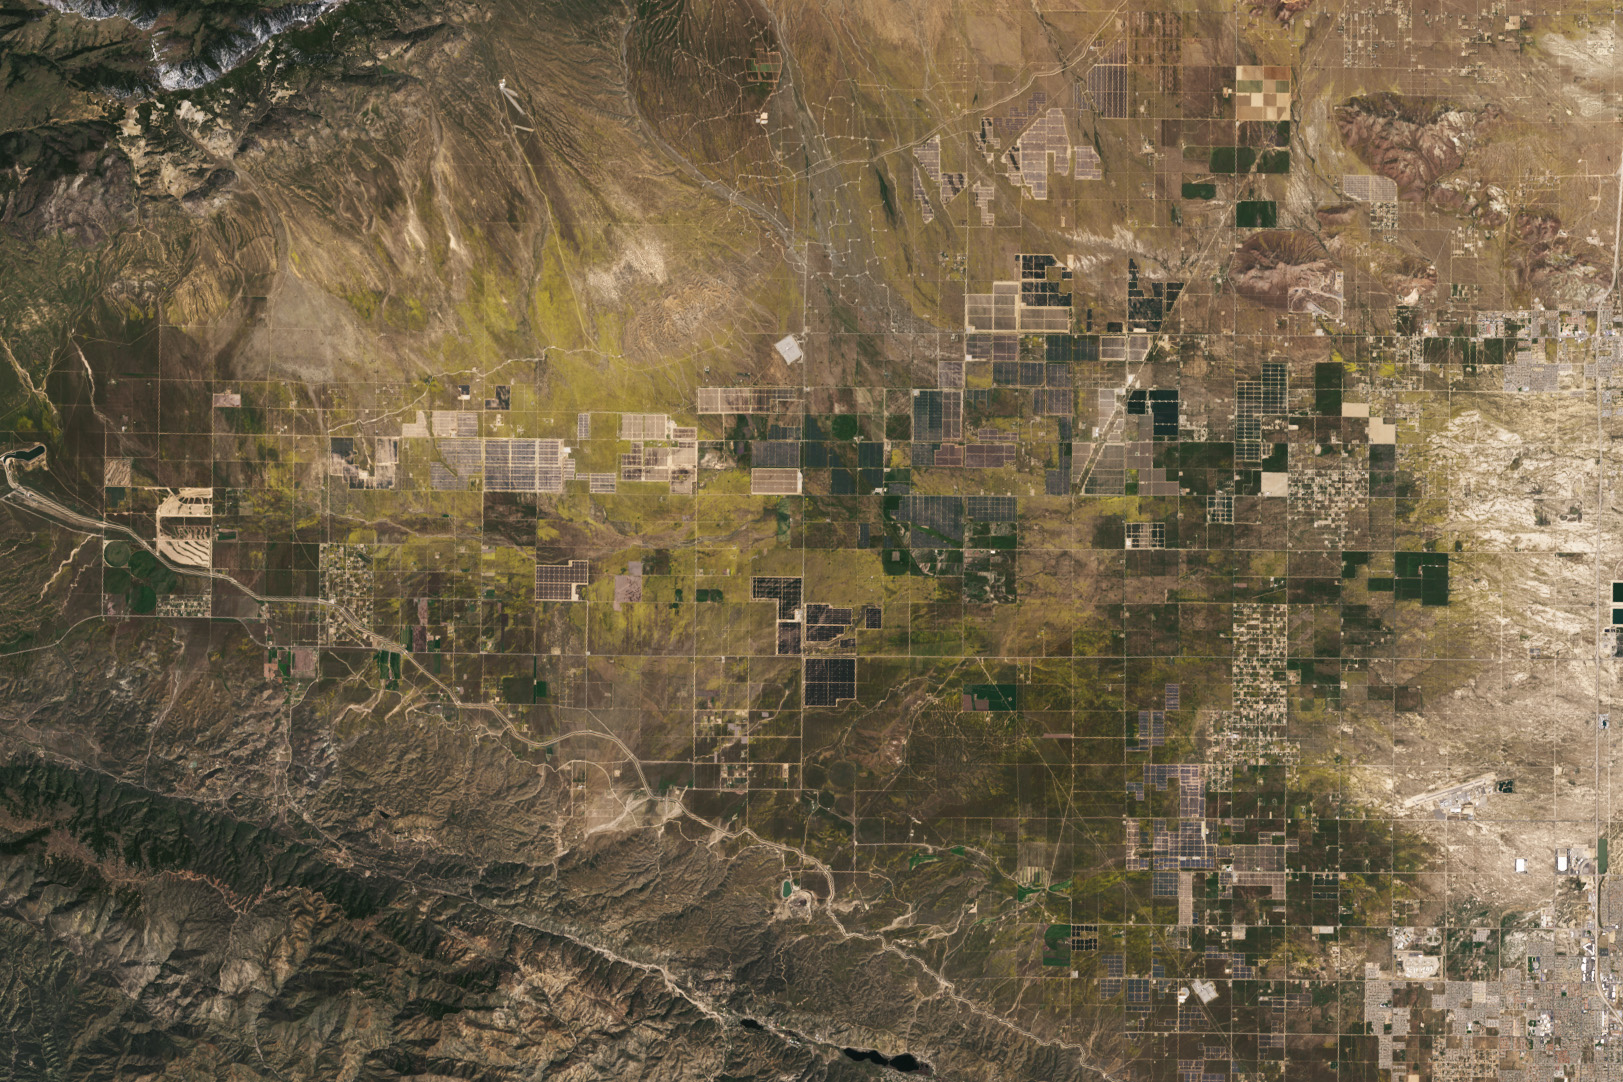 Satellite image of fields of yellow wildflowers blanketing Antelope Valley amid solar and wind farms.